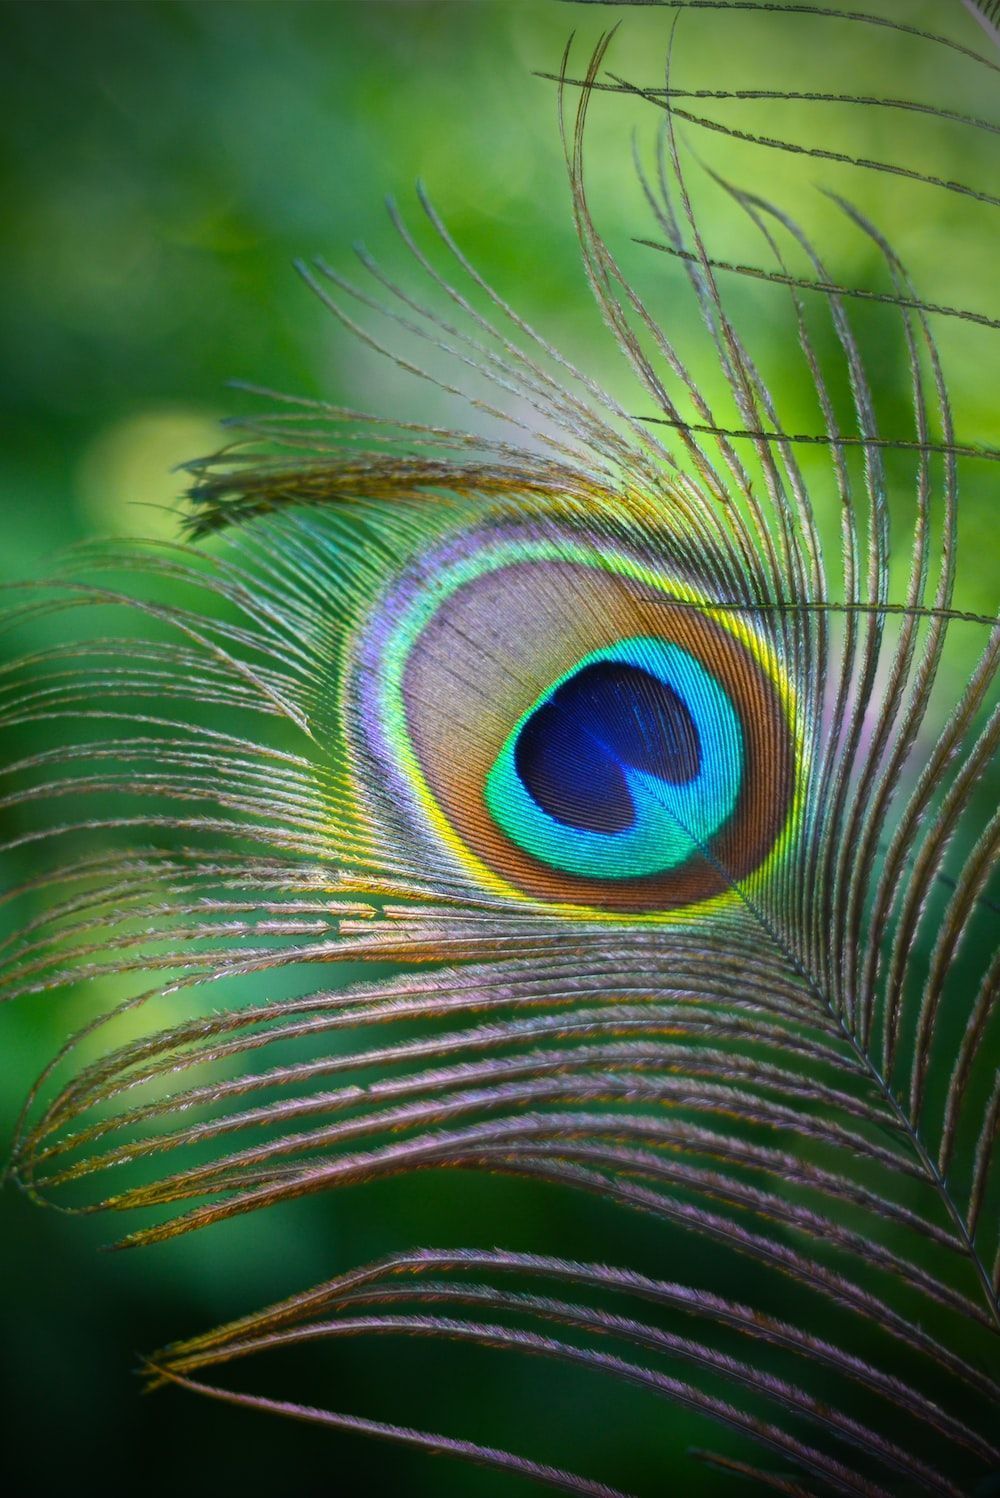 A close up of a peacock feather with a green background - Feathers, peacock